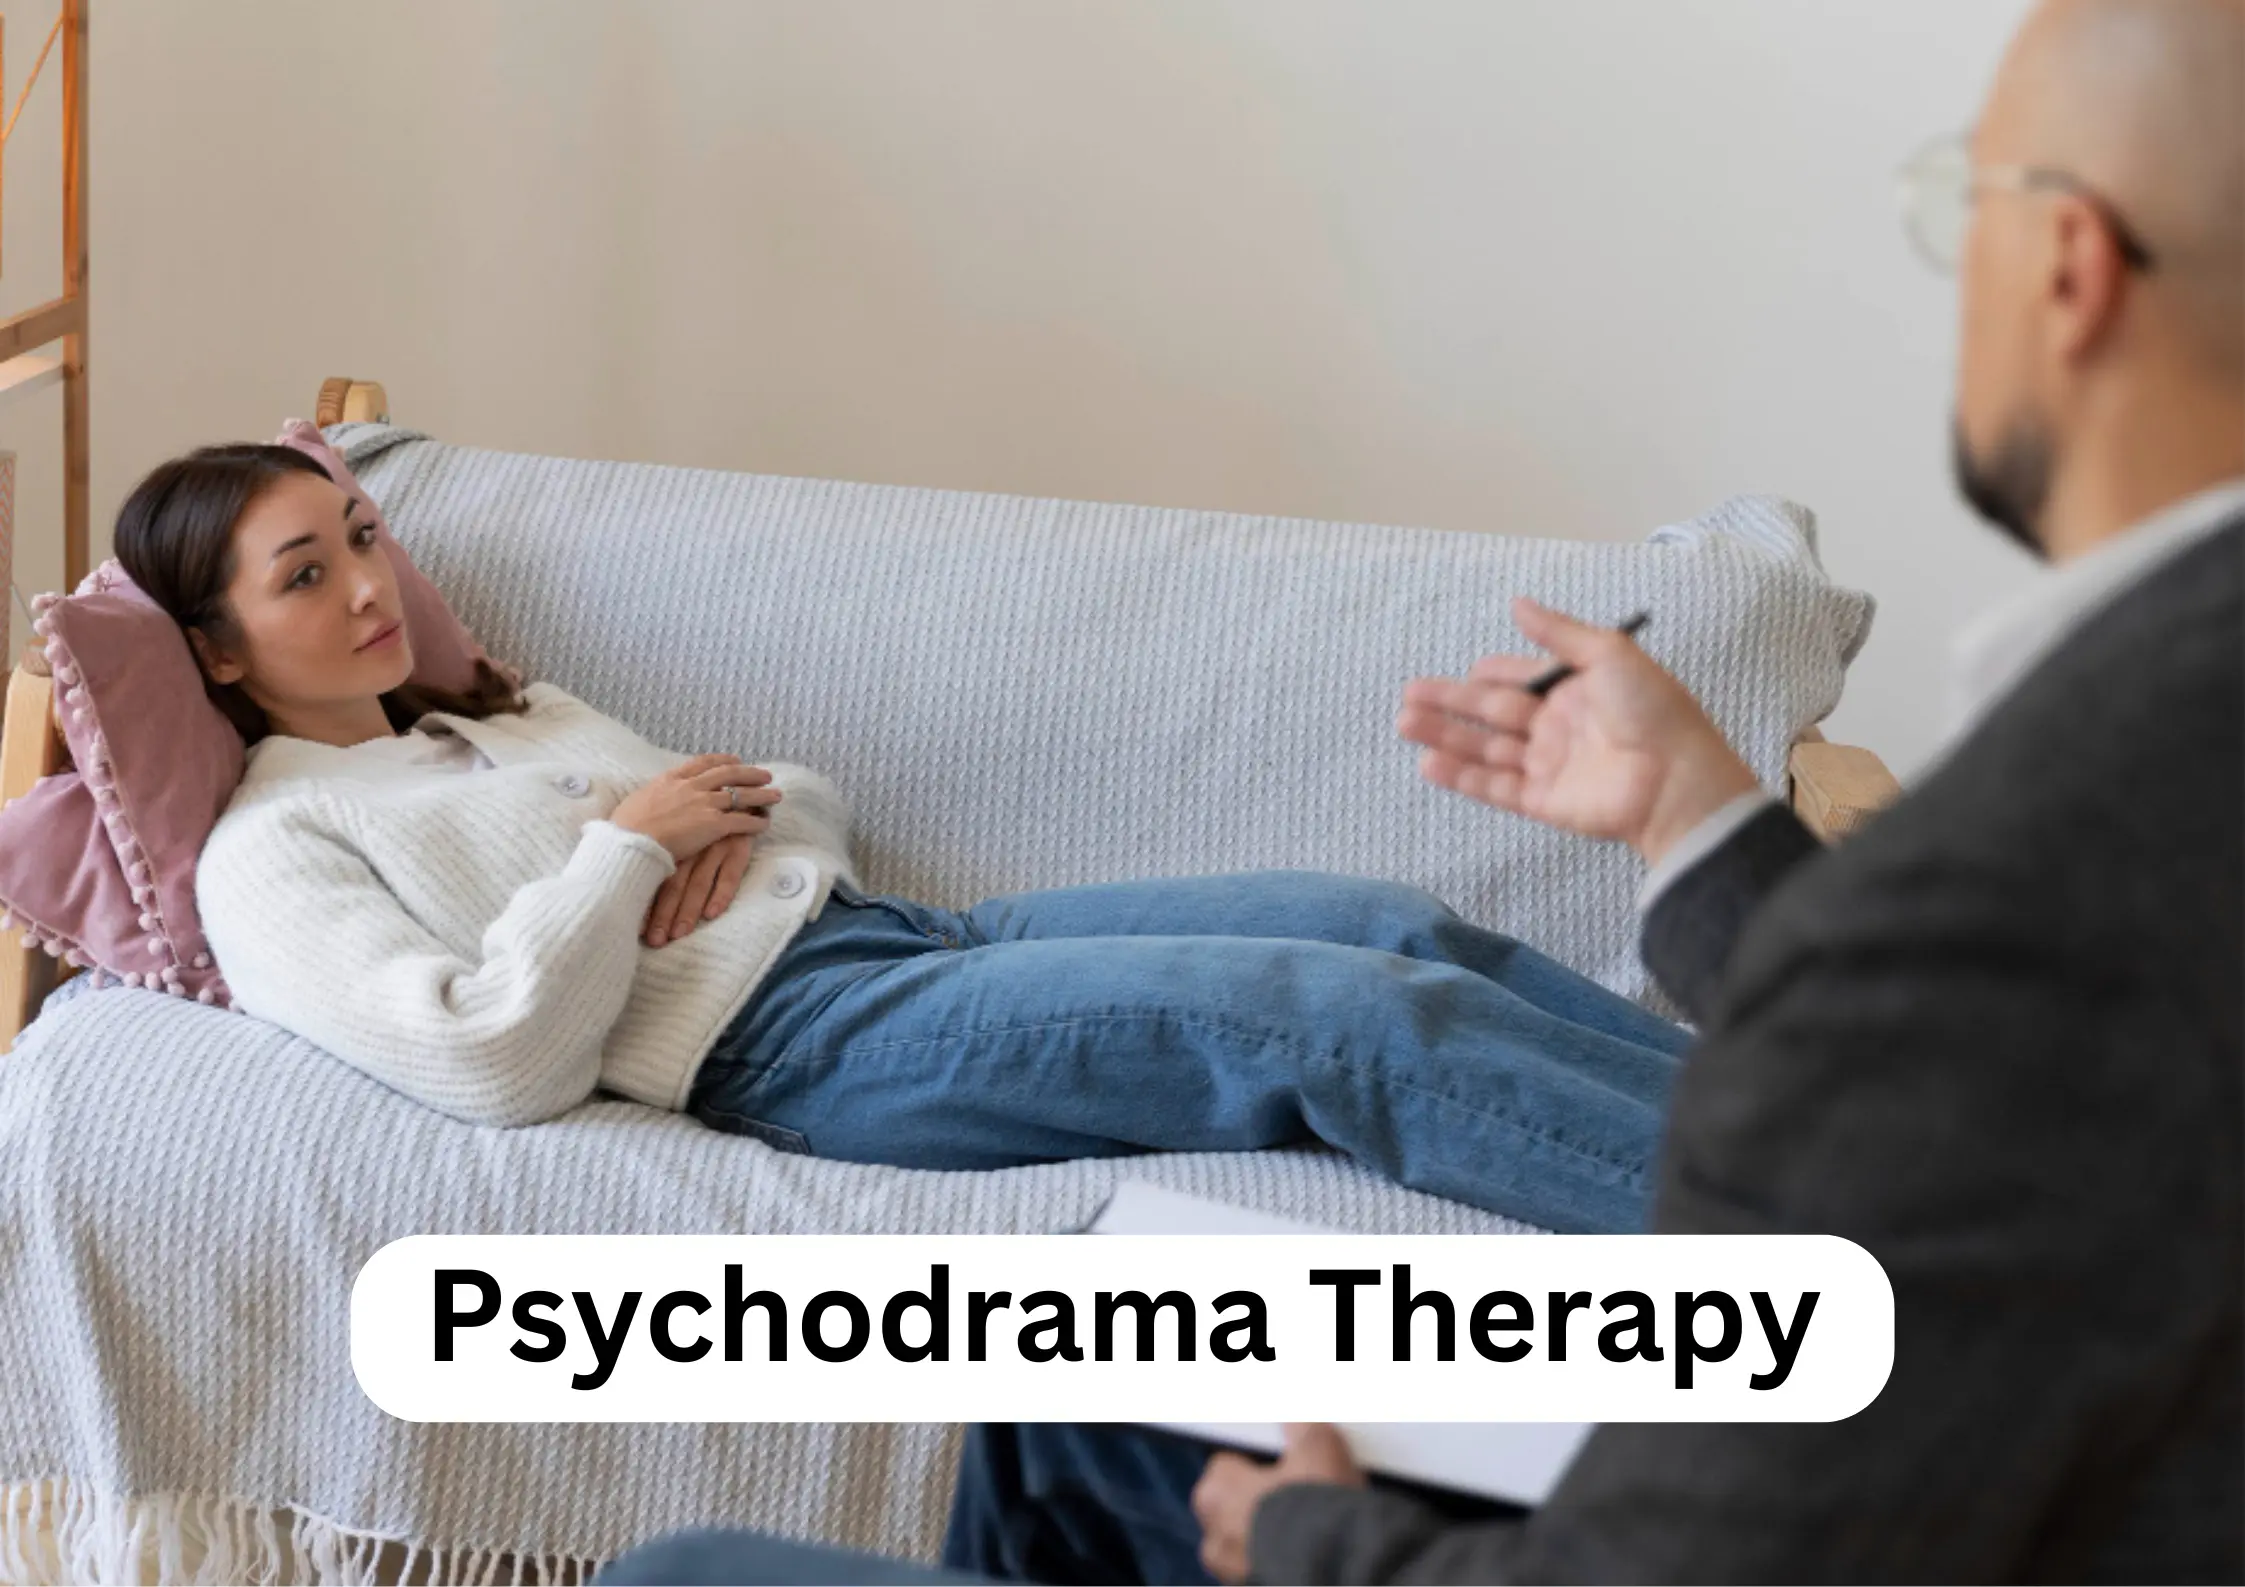 Psychodrama Therapy: Discover the Benefits And Techniques